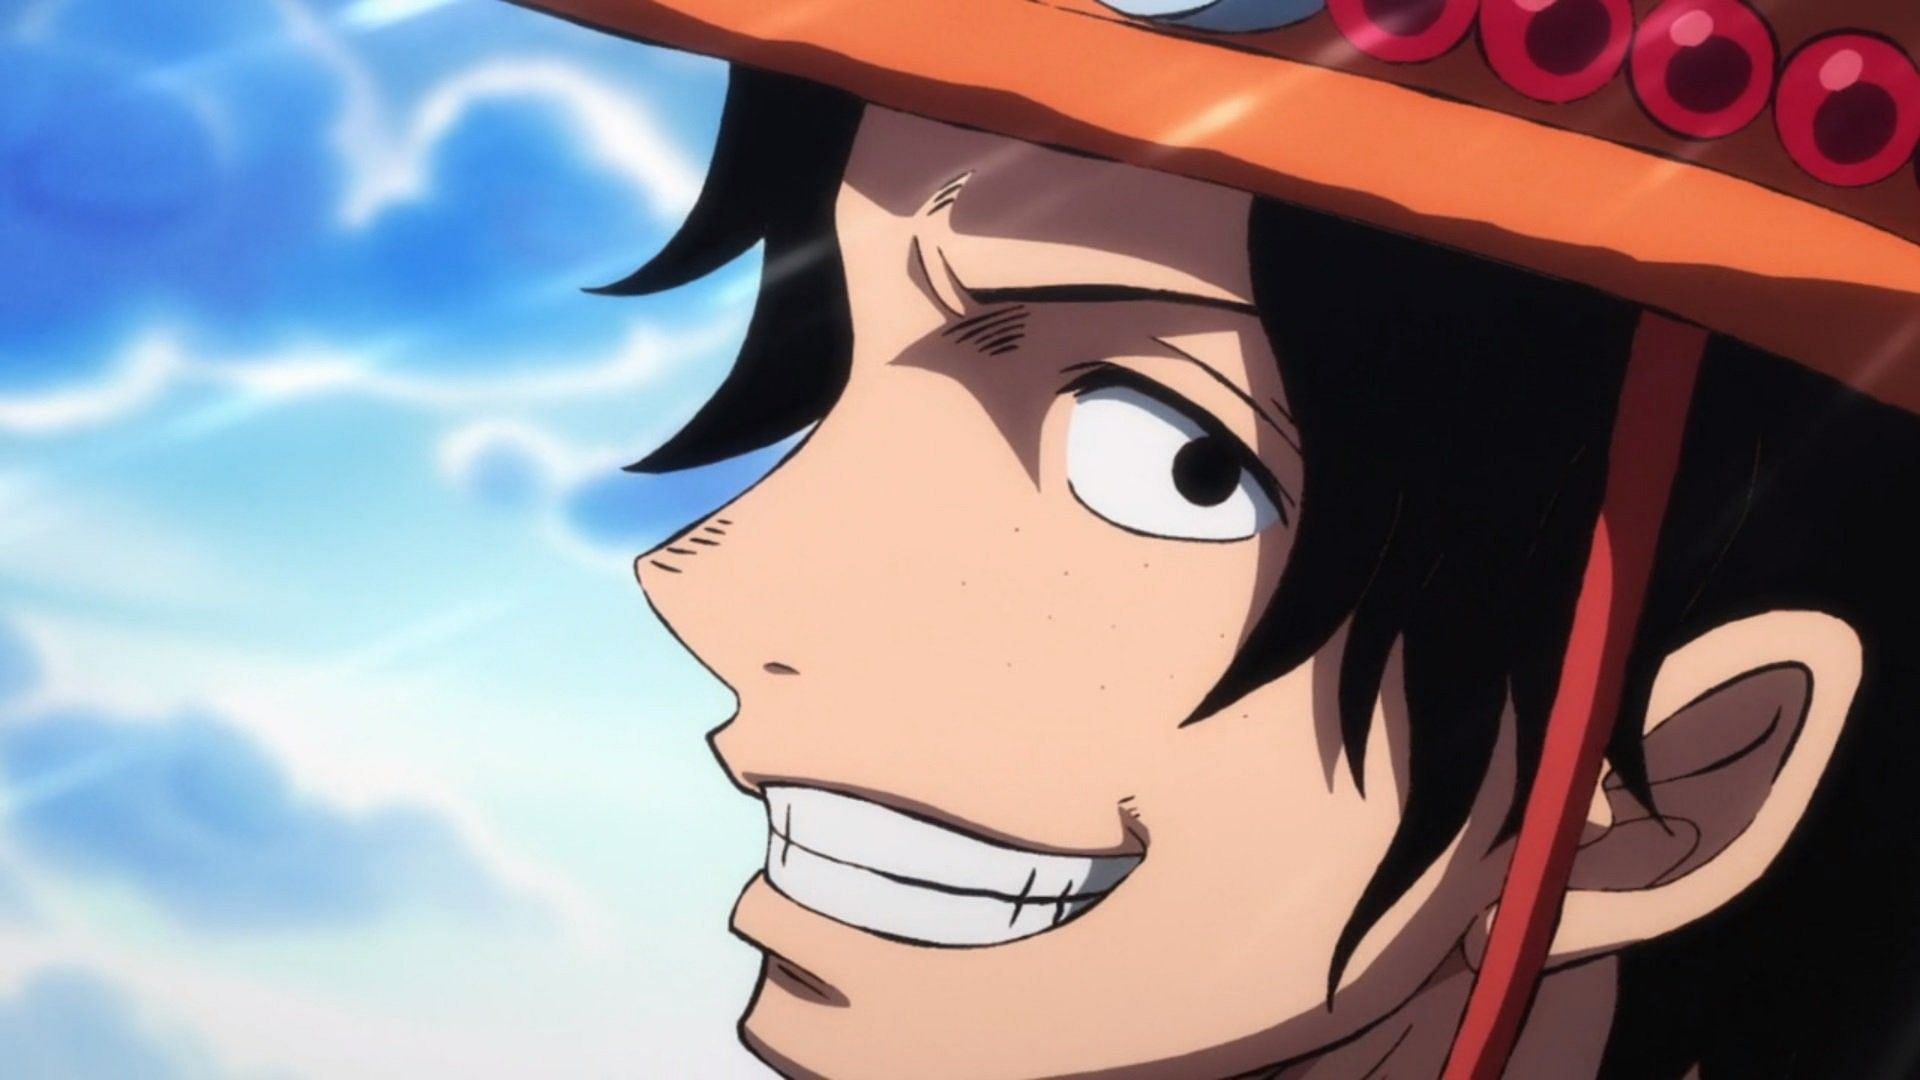 One Piece Episode 1013 Tobi Roppo Re Introductions Continue Yamato Meets Ace And More